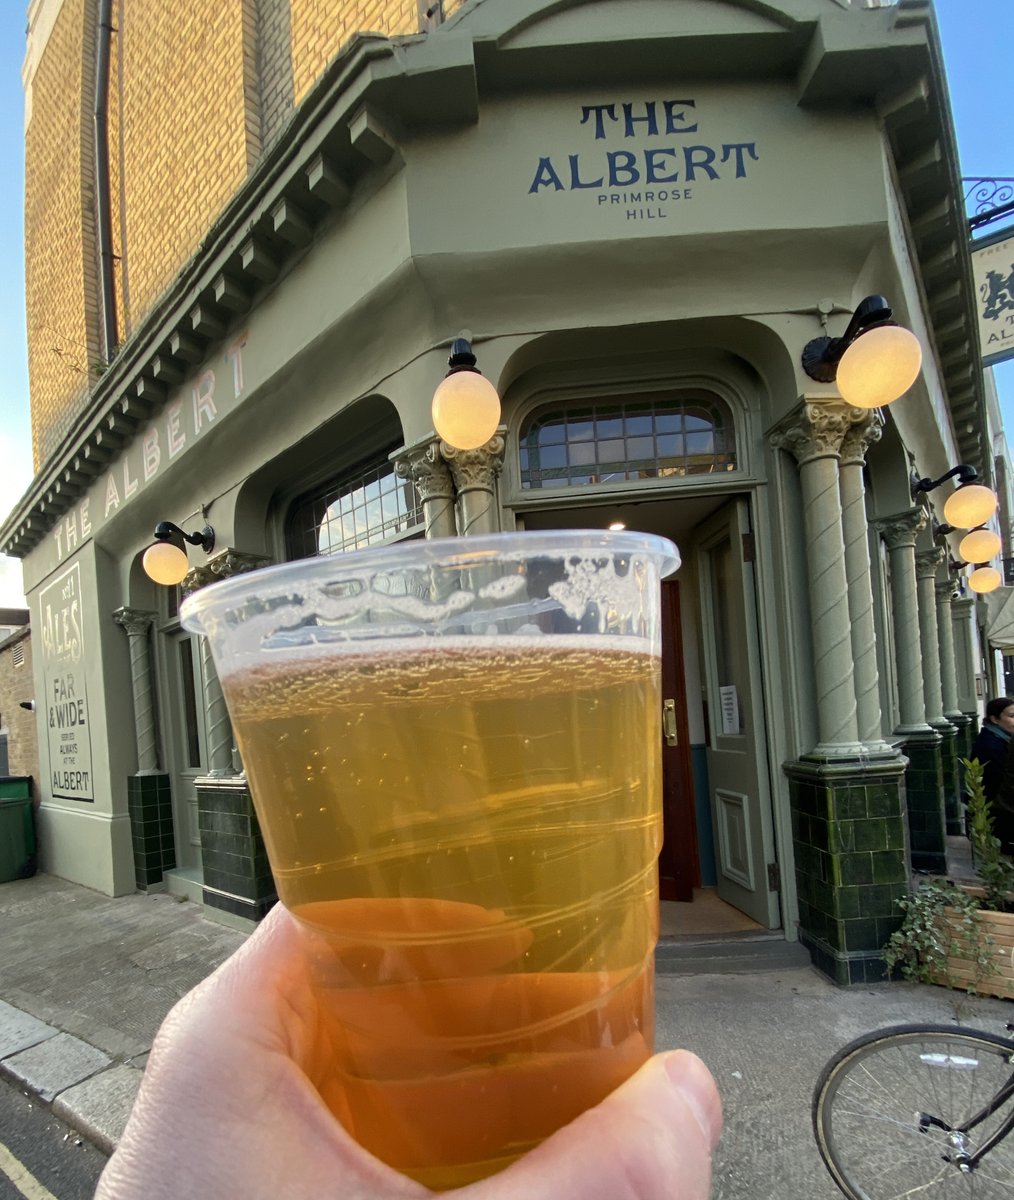 'The Albert and Carlton Tavern - Back from the brink' a Camden @NewJournal Podcast featuring Primrose Hill’s Albert pub @AlbertPrimrose @Primrose_Phil #PubsReopening #pubs #PrimroseHill ow.ly/sxxR50EqzHP